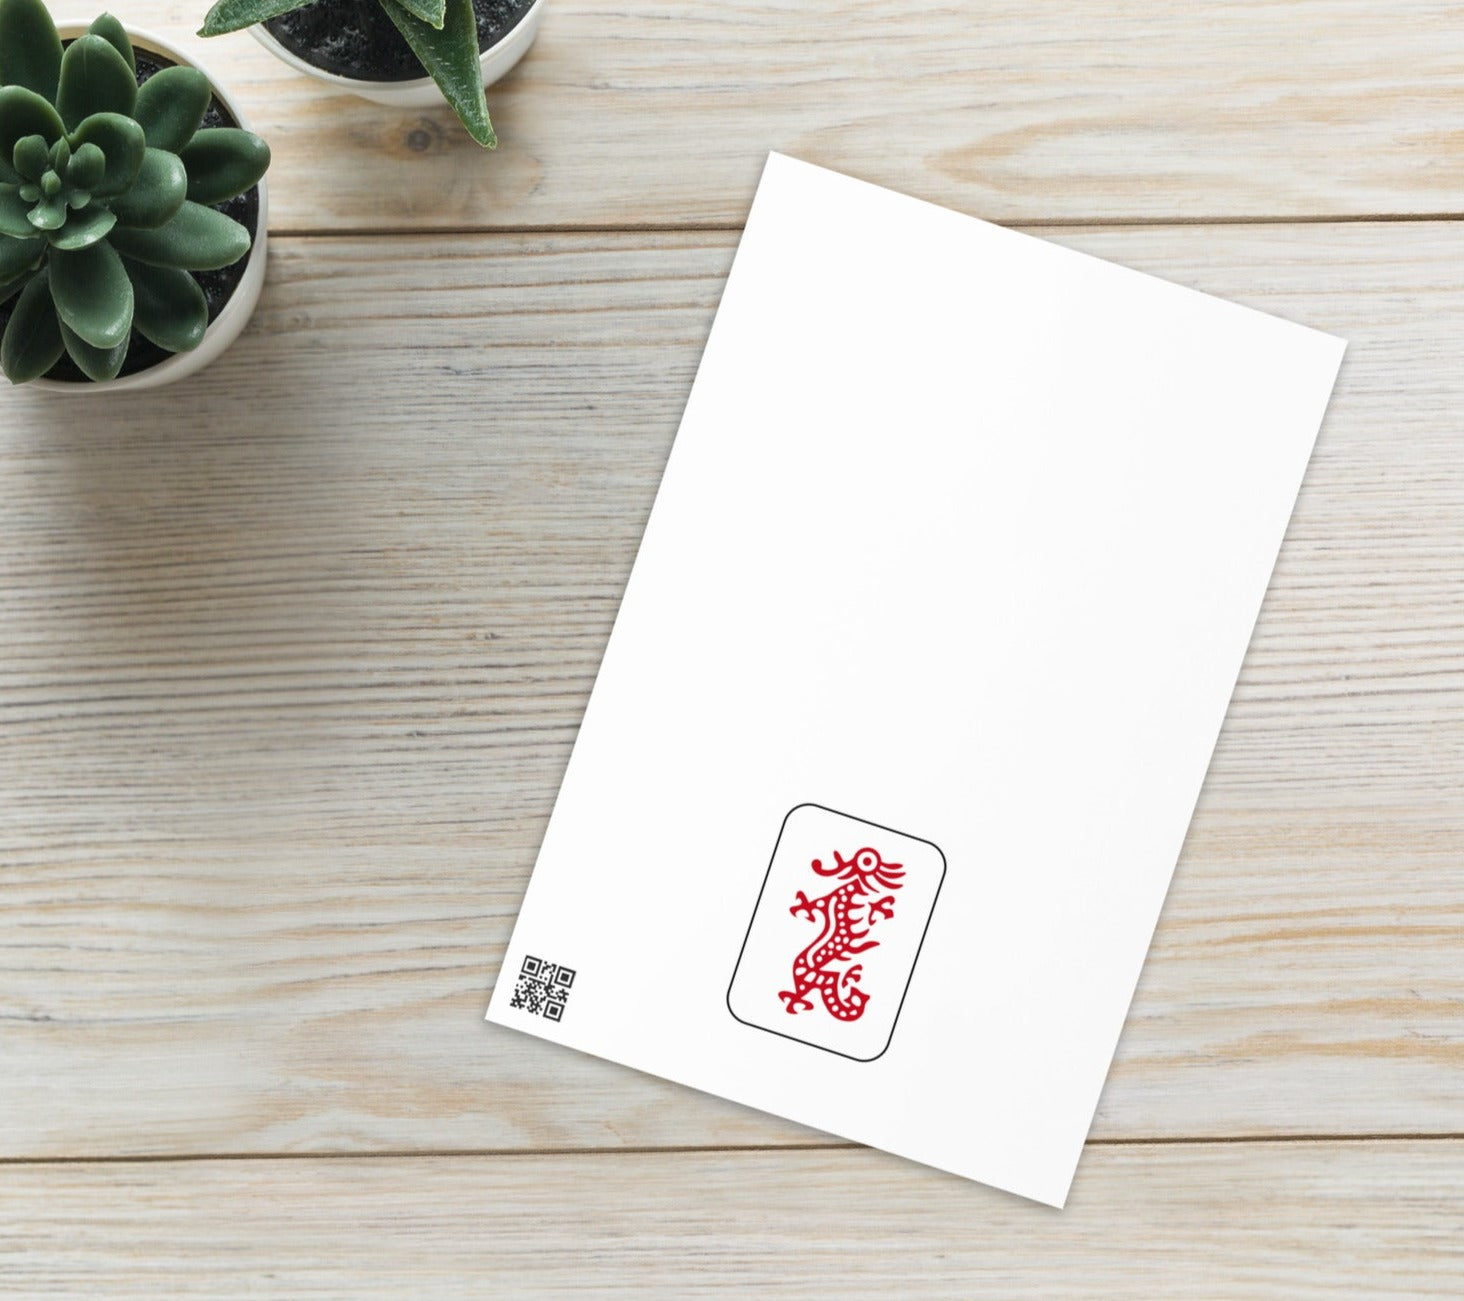 Back side of Mahjong greeting card with red dragon